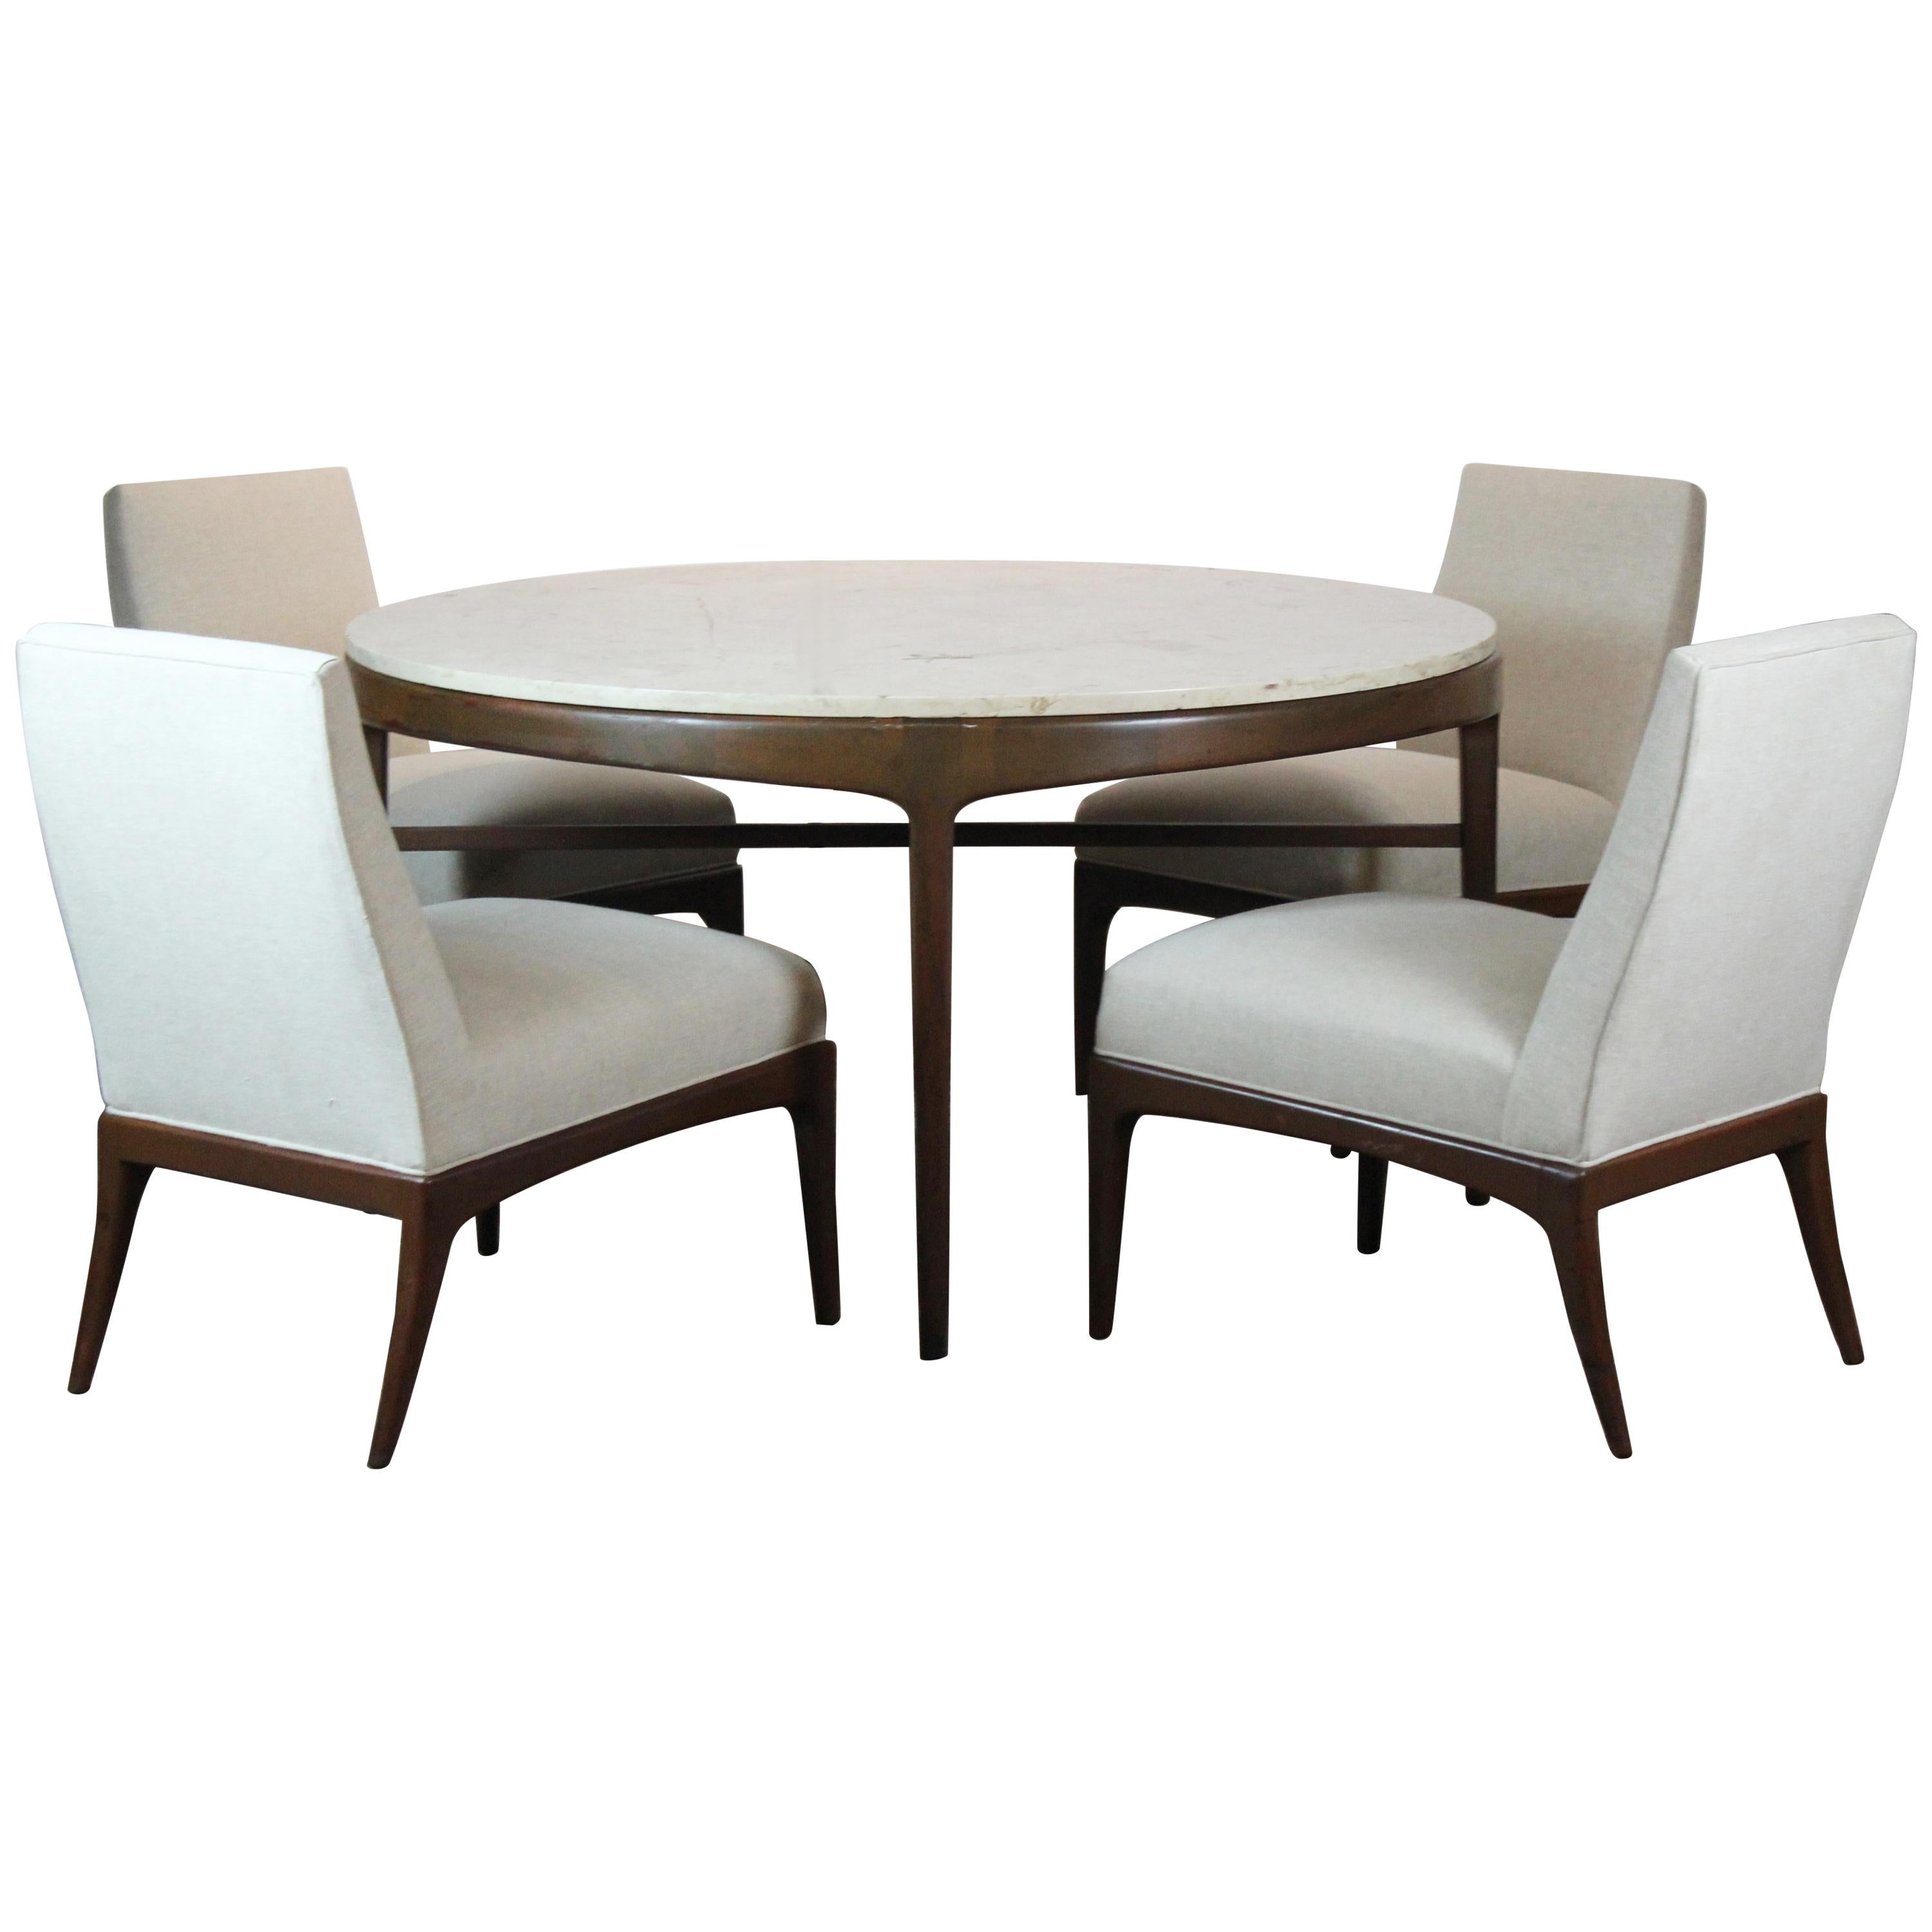 Travertine Table Four Chairs